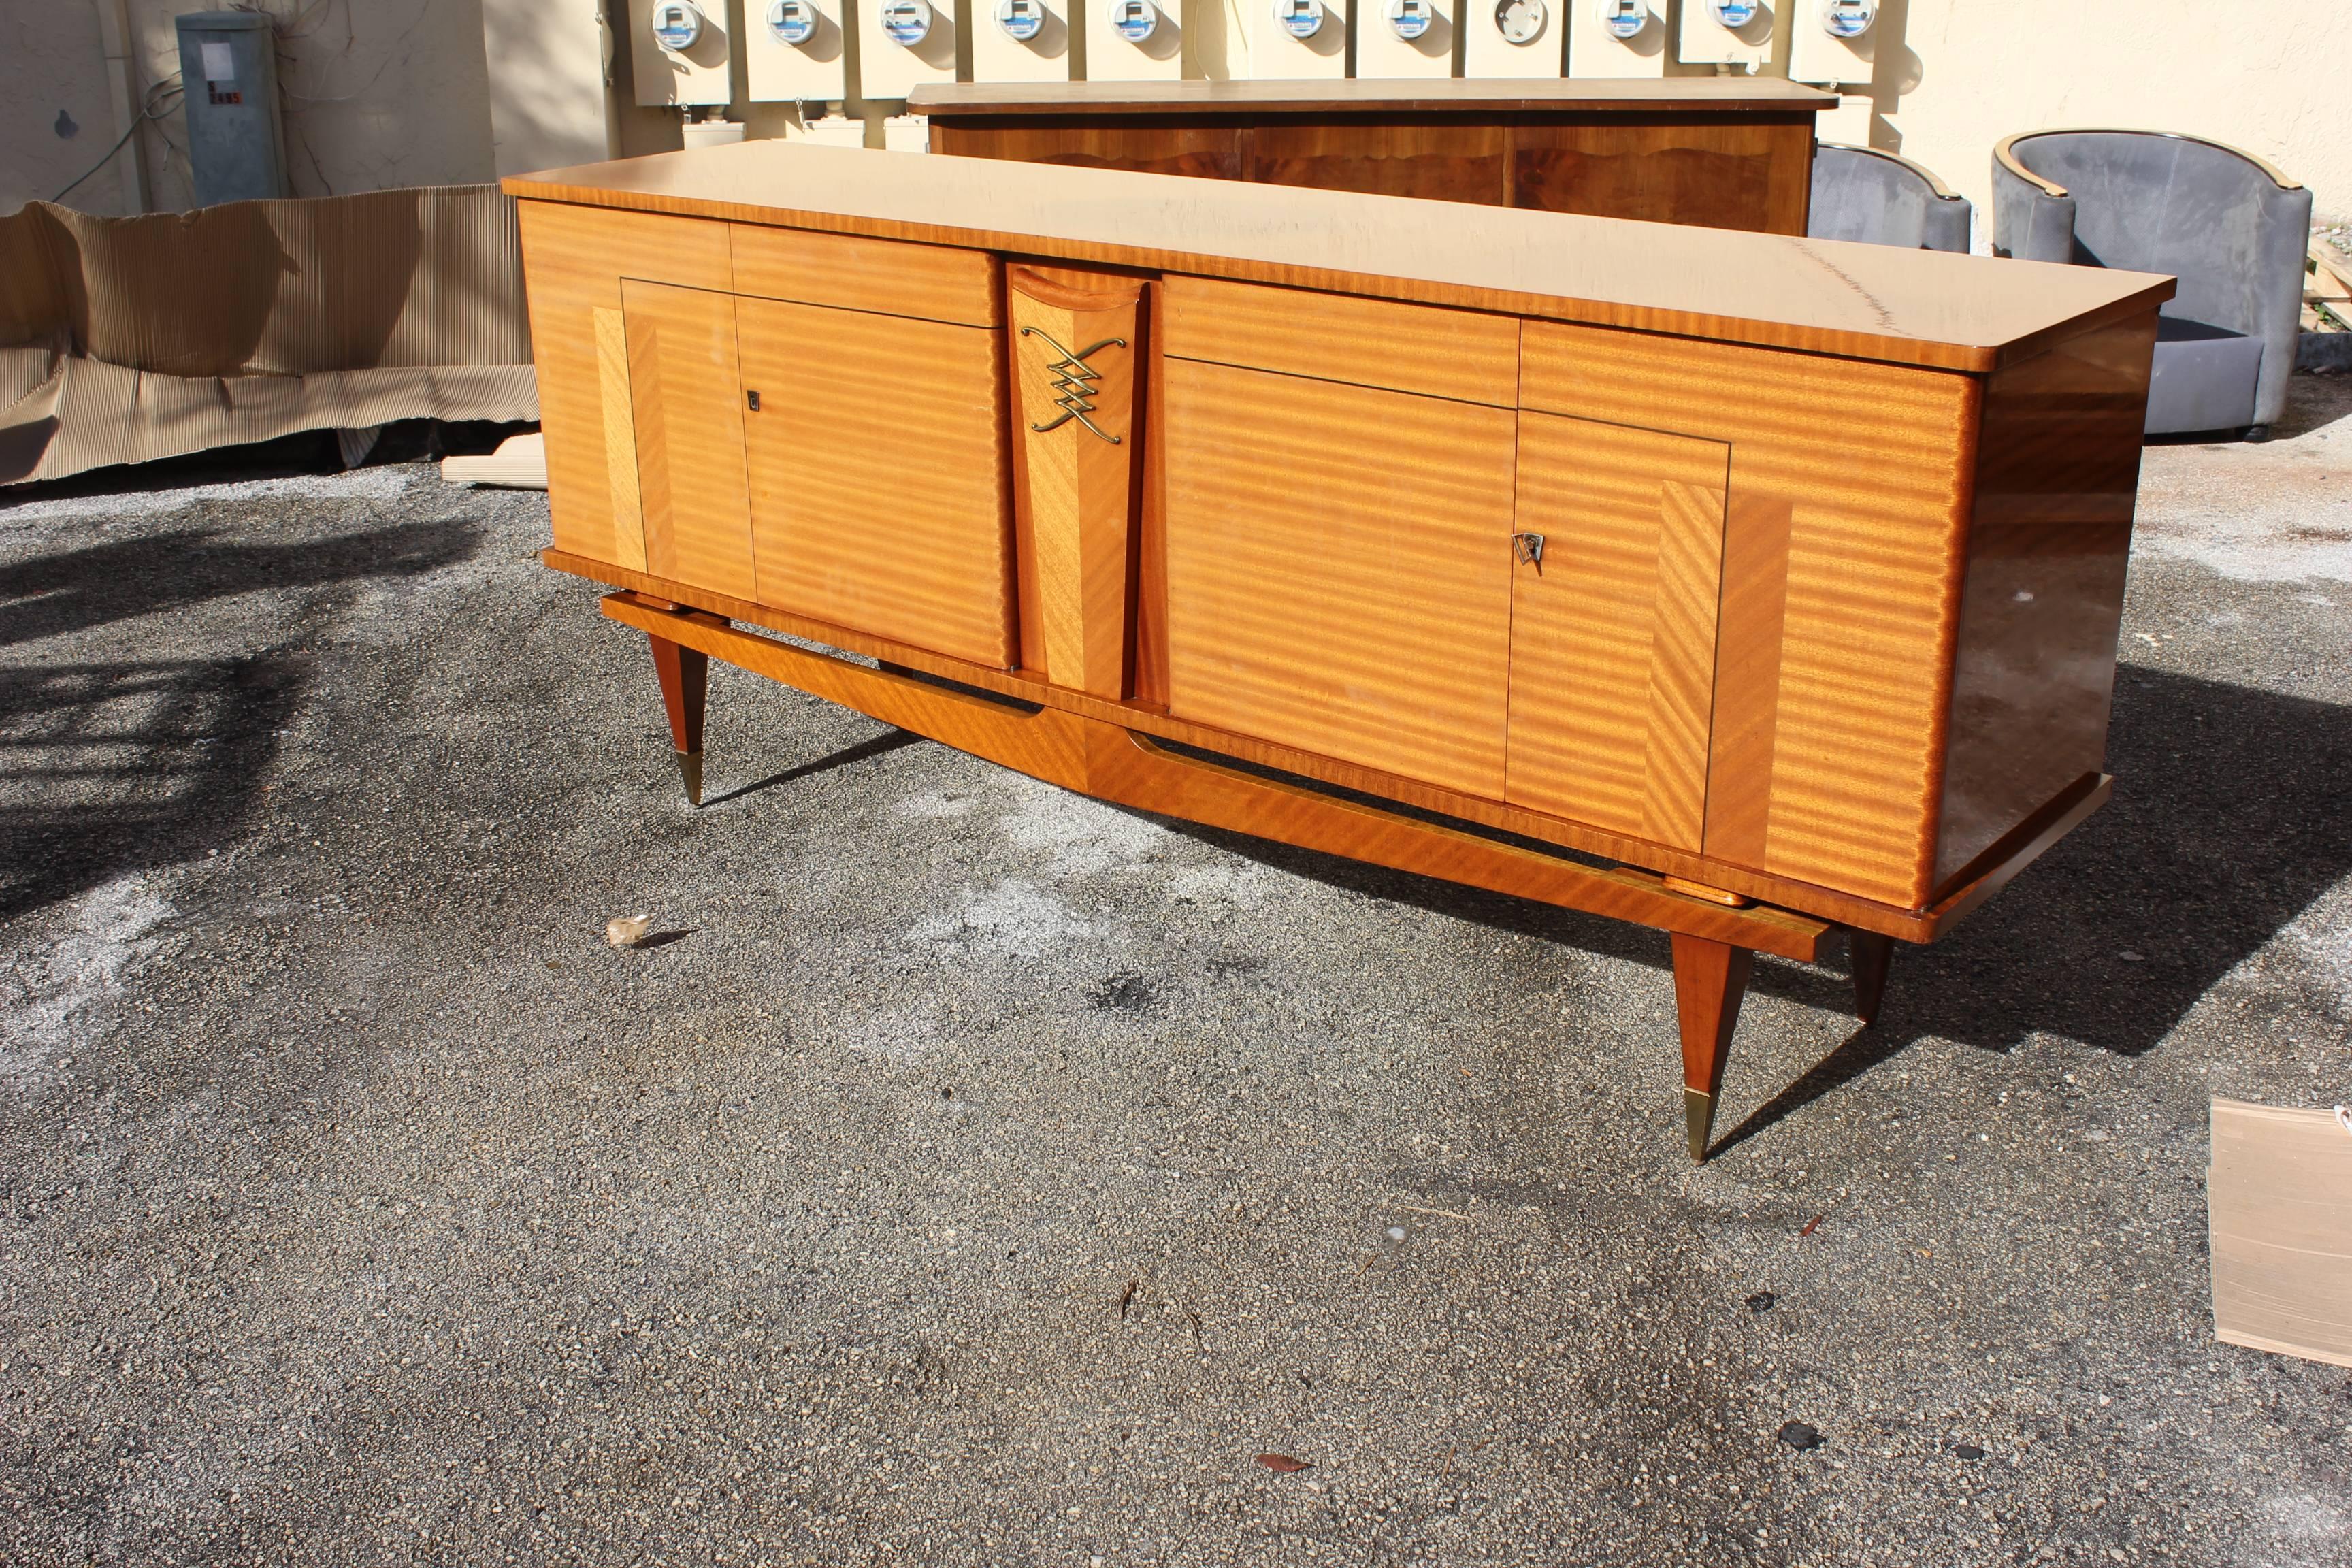 French Art Deco sideboard or buffet flame mahogany Ski Leg style, center bronze design, high gloss finish, circa 1940s. Please note these sideboard or buffets can be taken apart to accommodate elevator needs if necessary.